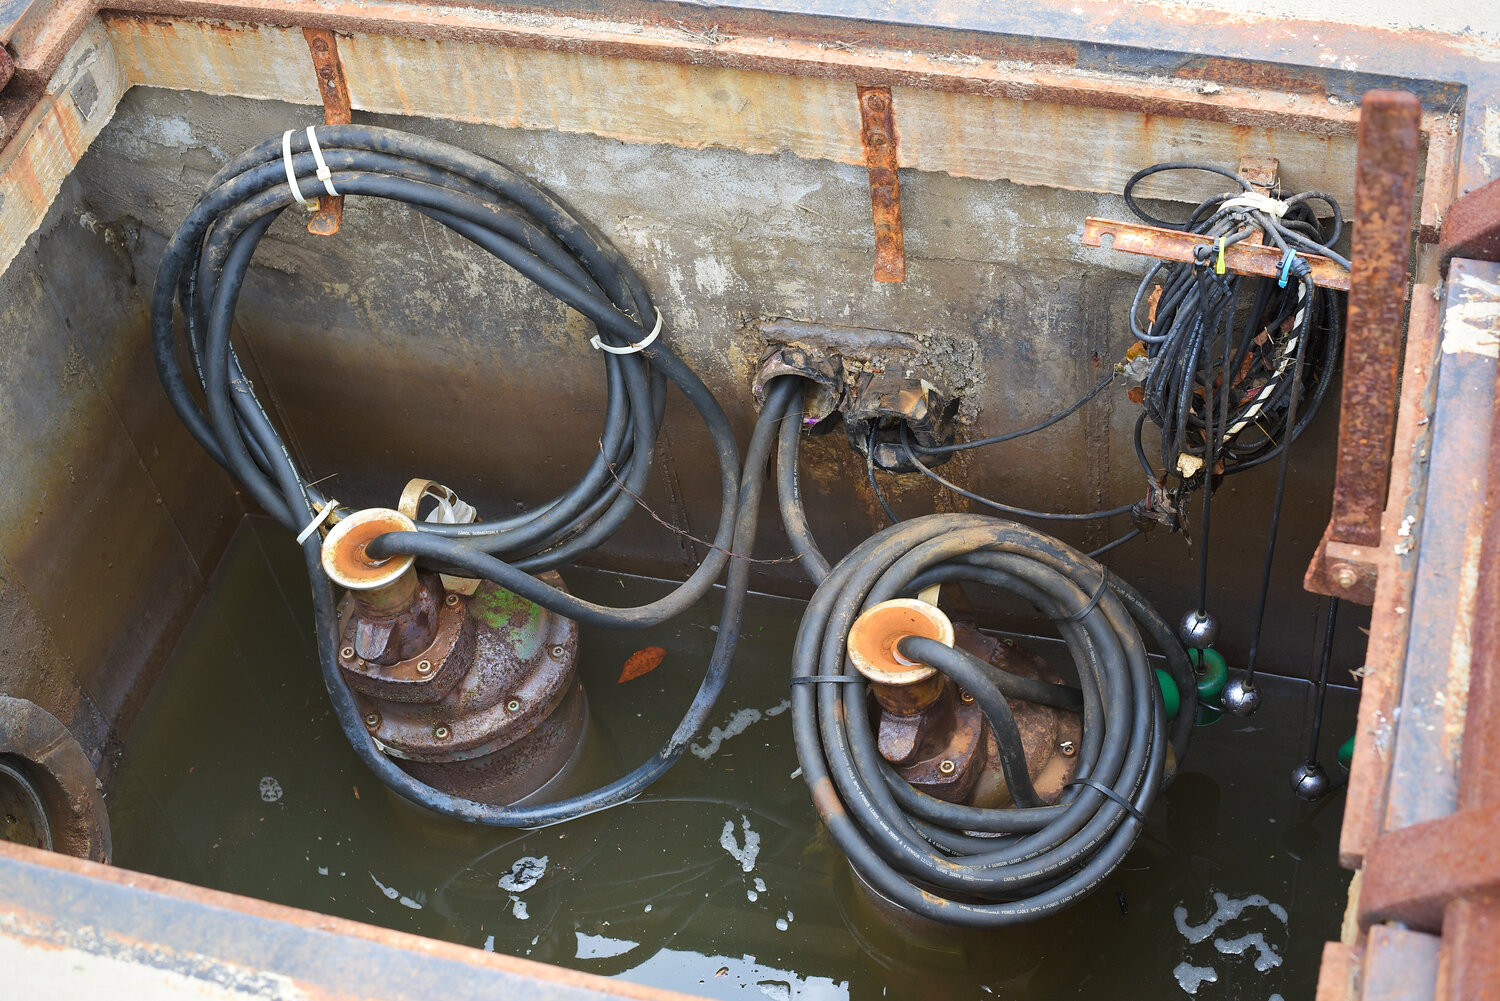 The new catch basin system is less prone to malfunction, but easier to fix if it does.